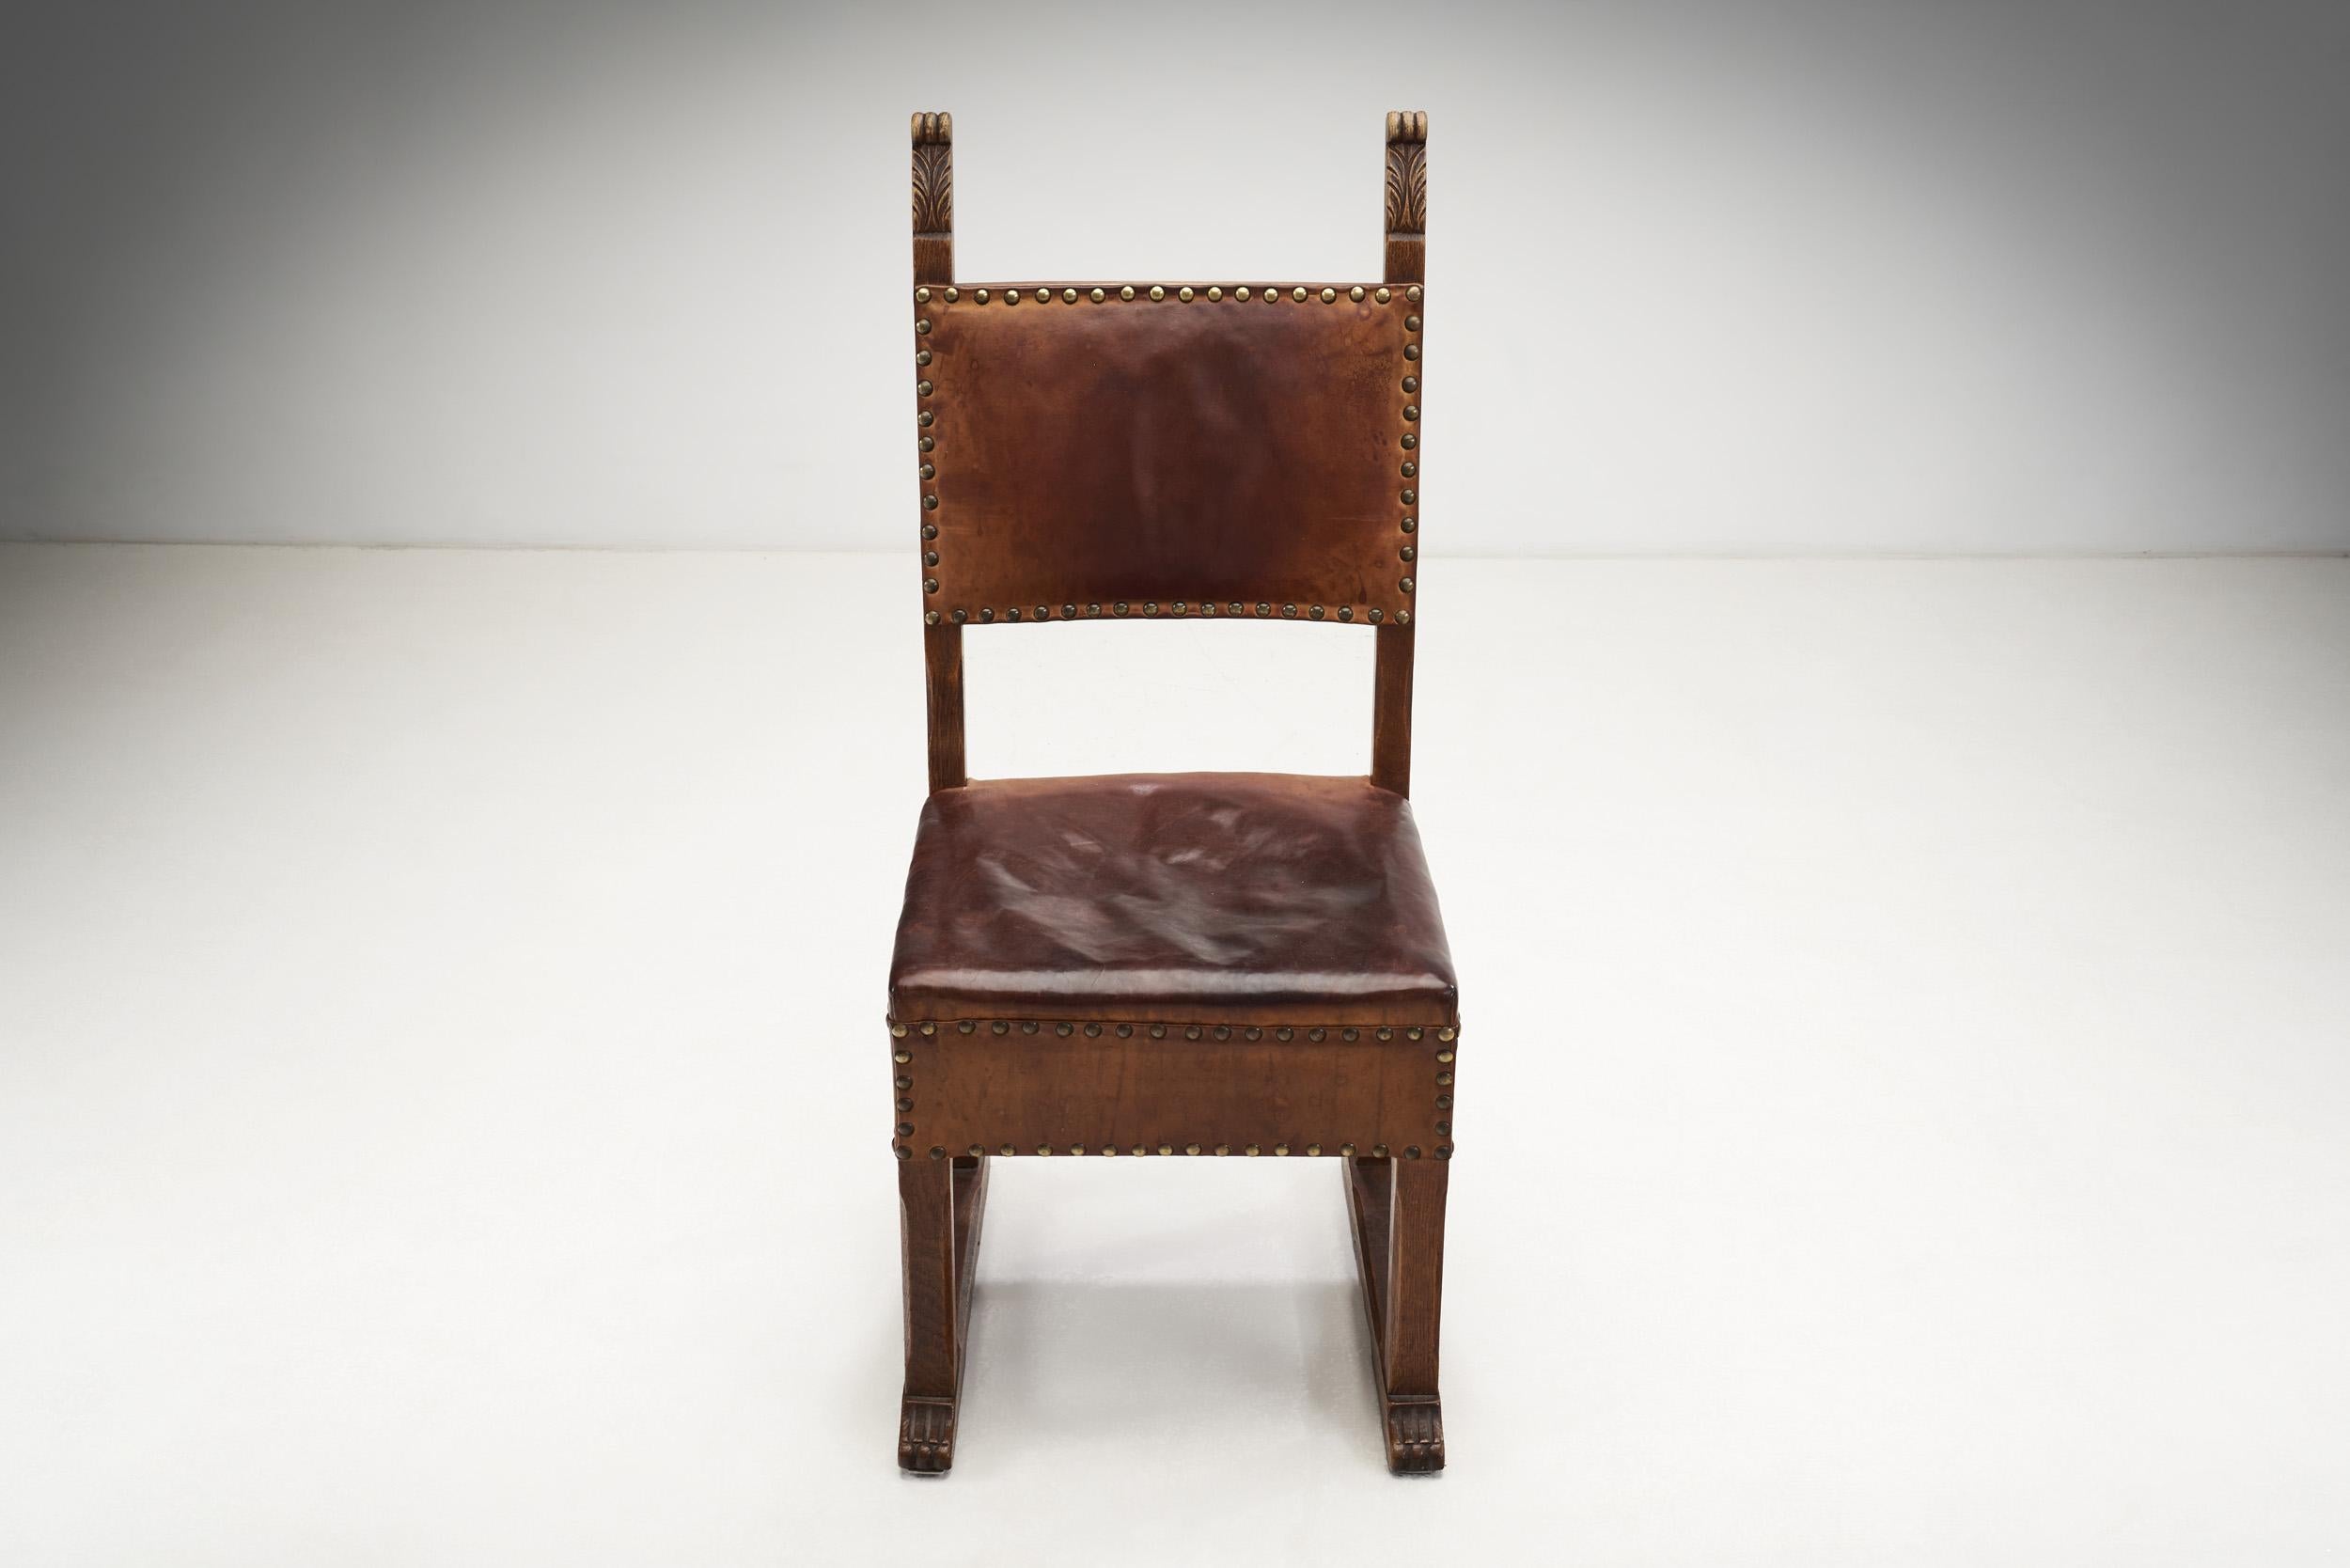 Wood European Patinated Oak and Leather Chairs with Upholstery Tacks, Europe Ca 1900s